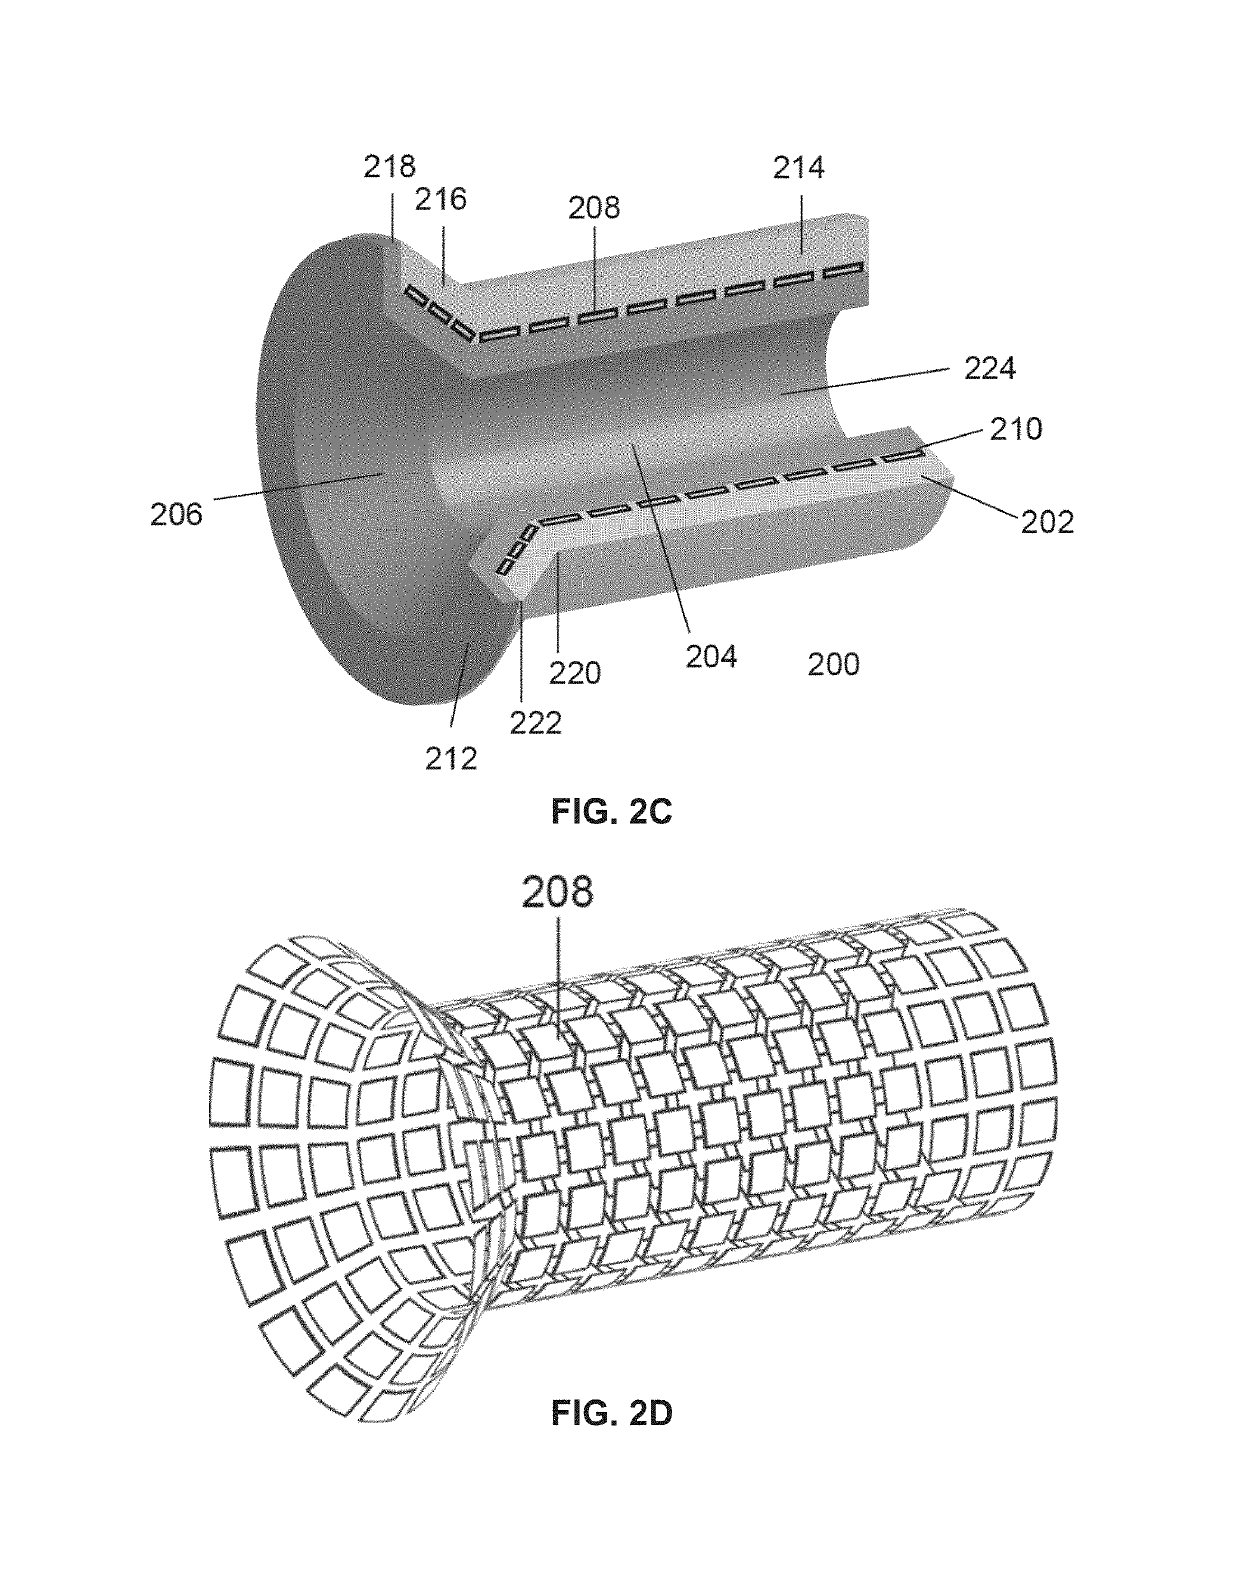 Acoustic shock wave devices and methods for generating a shock wave field within an enclosed space